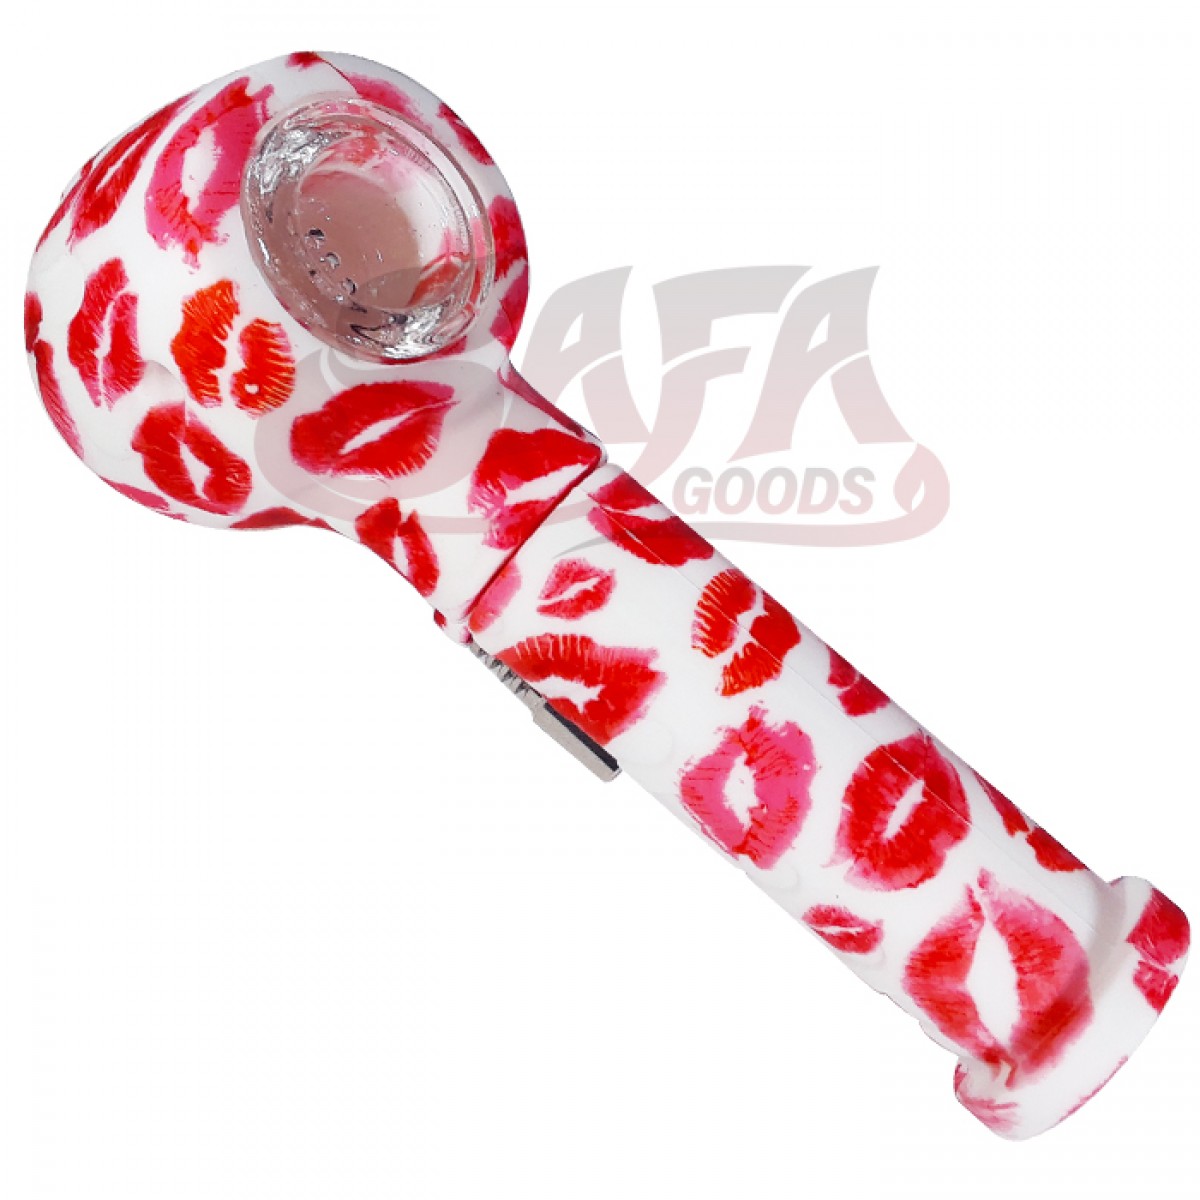 5.5 Inch Silicone Hand Pipe & Nectar Collectors [Graphics]